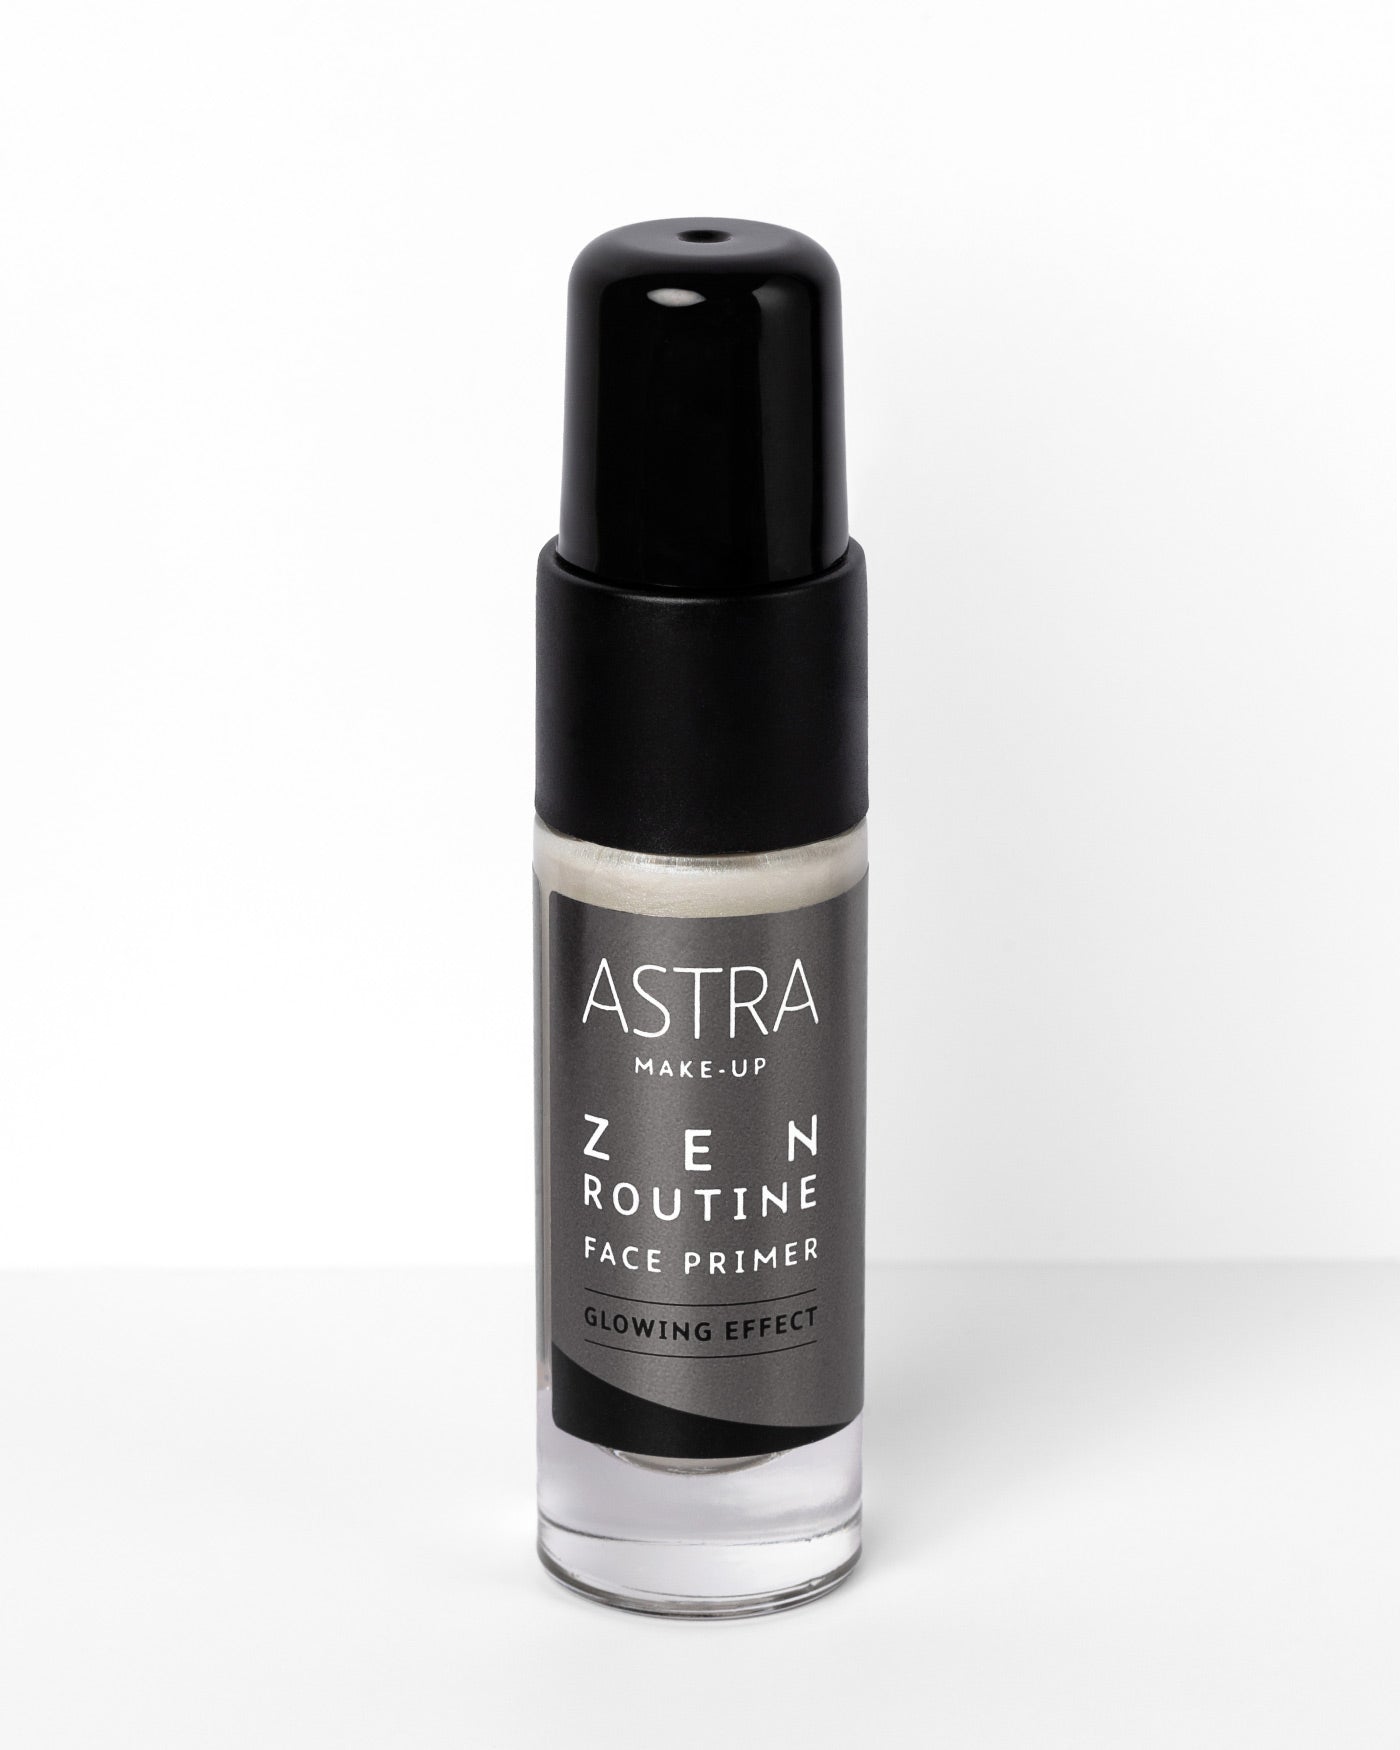 ZEN ROUTINE FACE PRIMER GLOWING EFFECT - All Products - Astra Make-Up